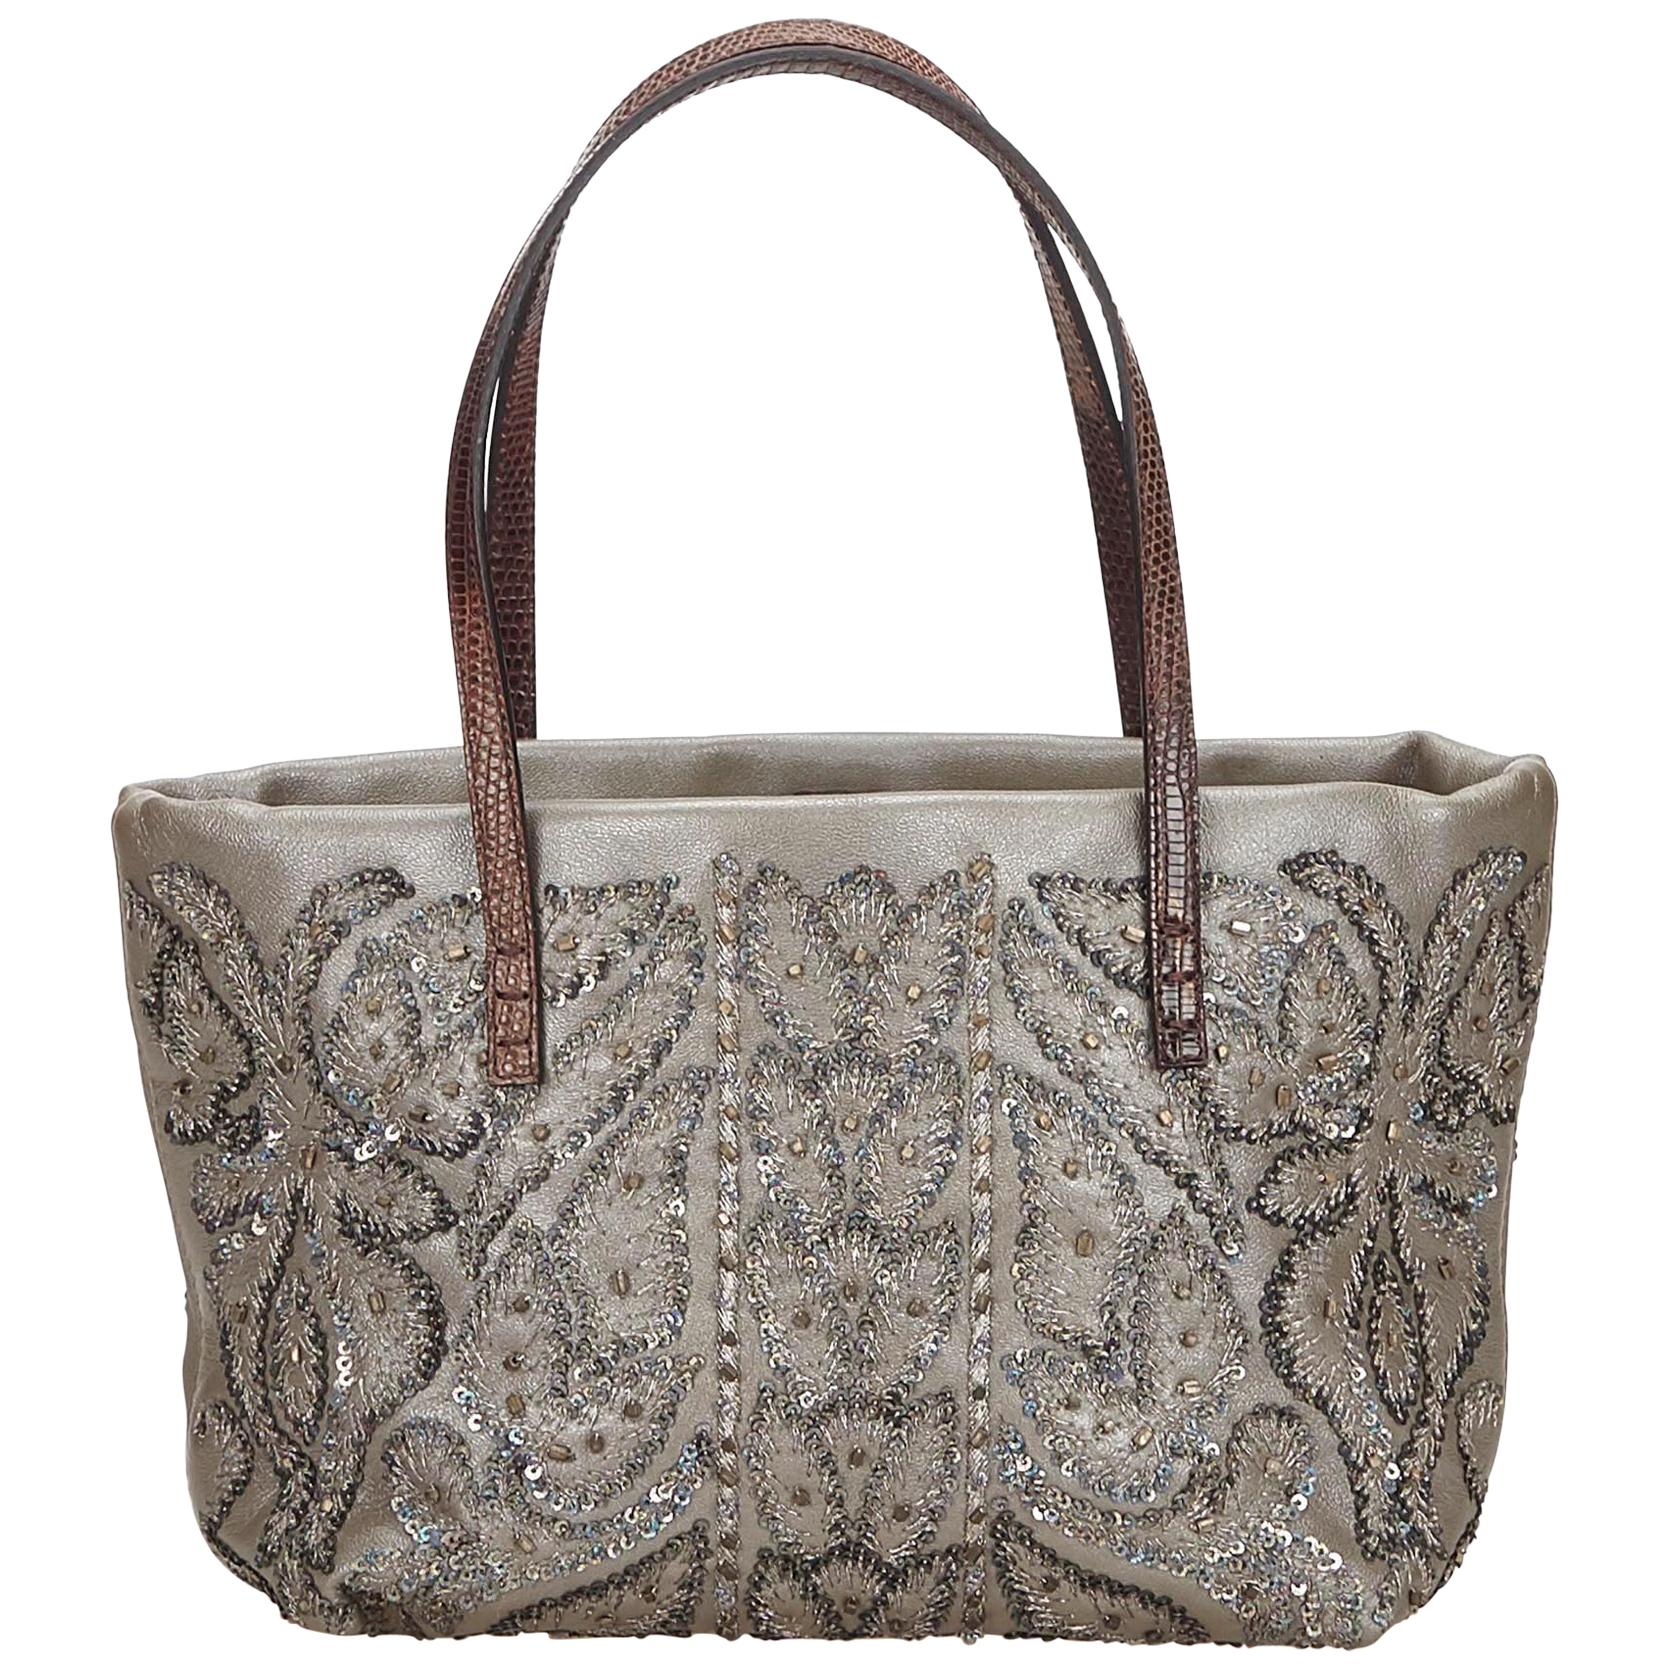 Fendi Gray x Brown Beaded Leather Tote